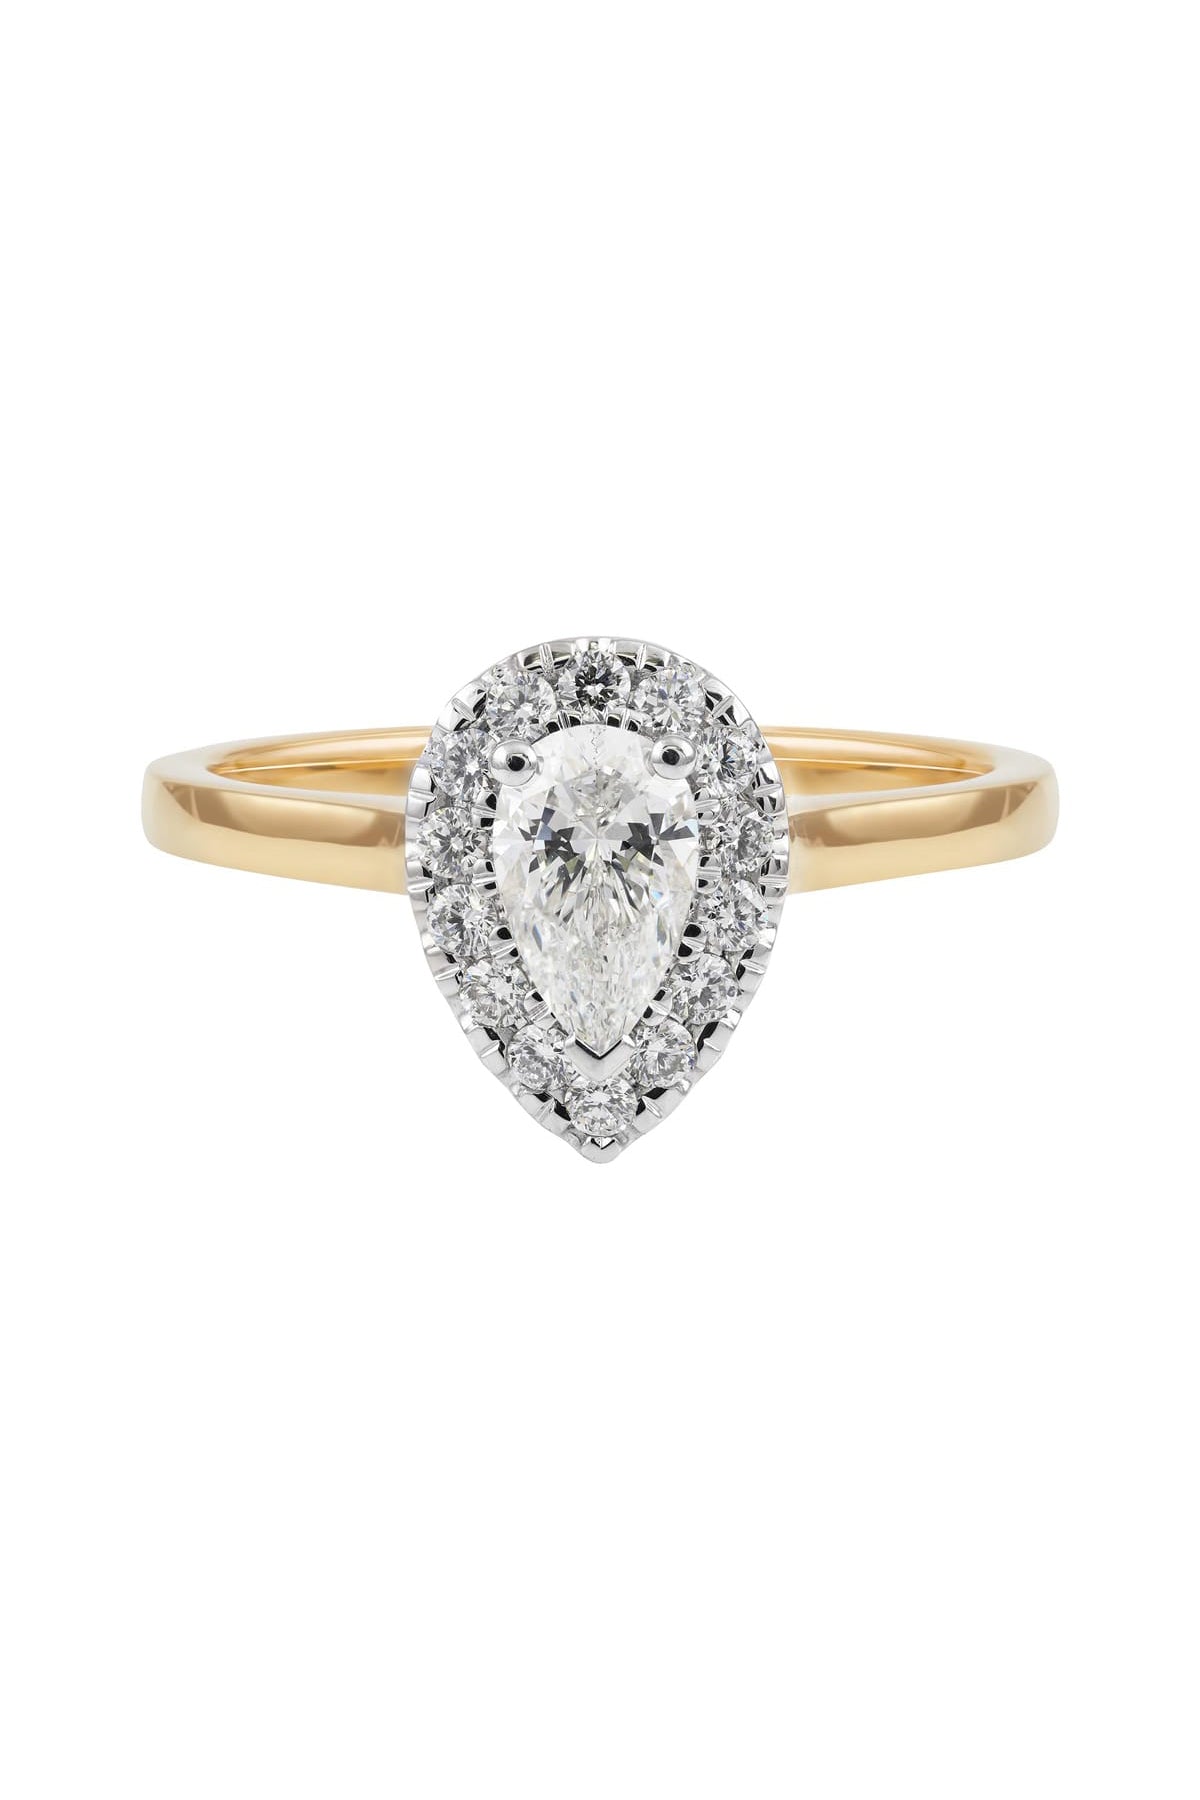 0.40ct Pear Cut Diamond Halo Engagement Ring set in Yellow and White Gold available at LeGassick Diamonds and Jewellery Gold Coast, Australia.